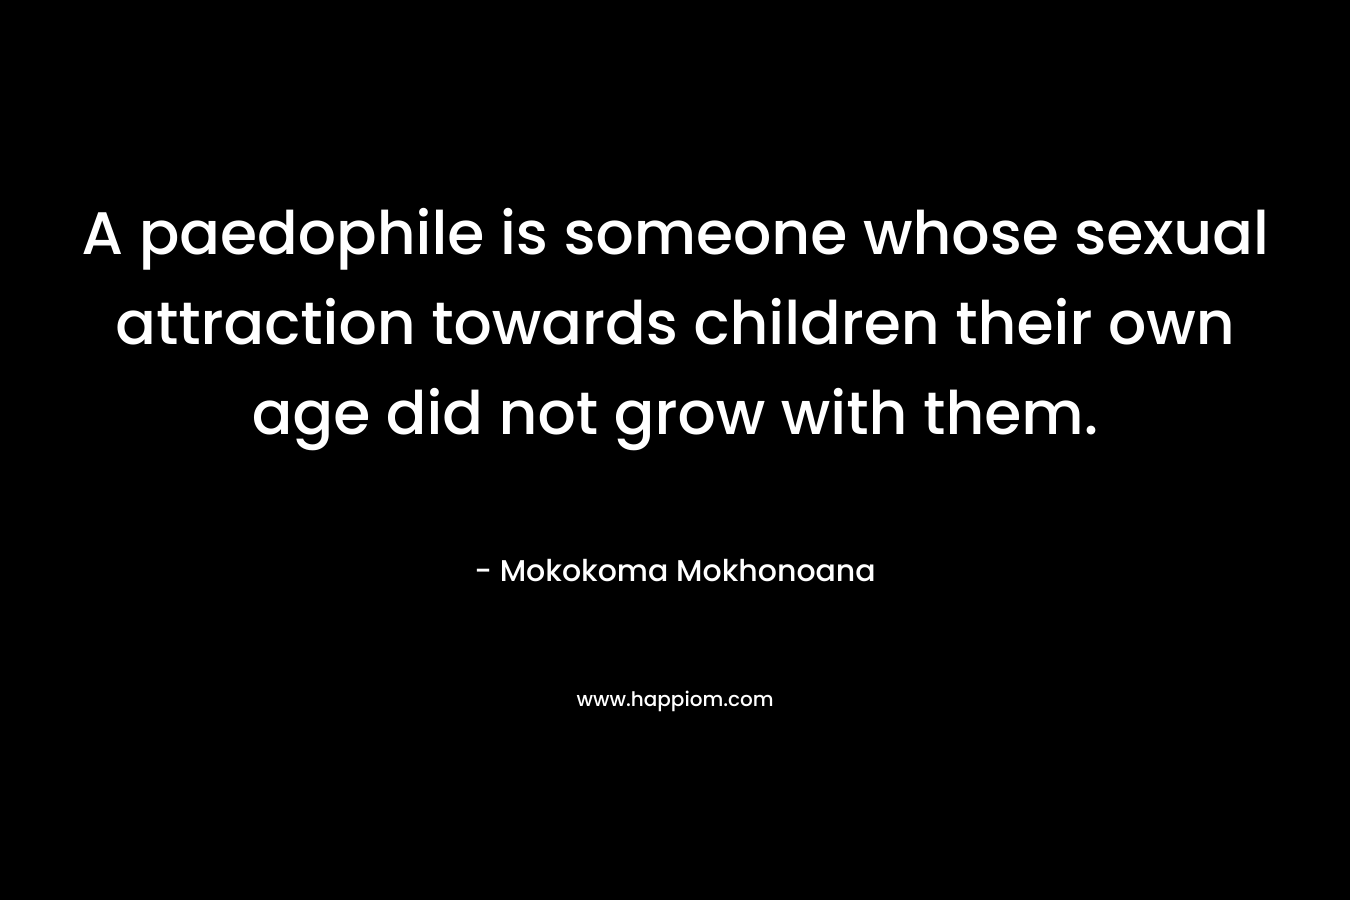 A paedophile is someone whose sexual attraction towards children their own age did not grow with them.